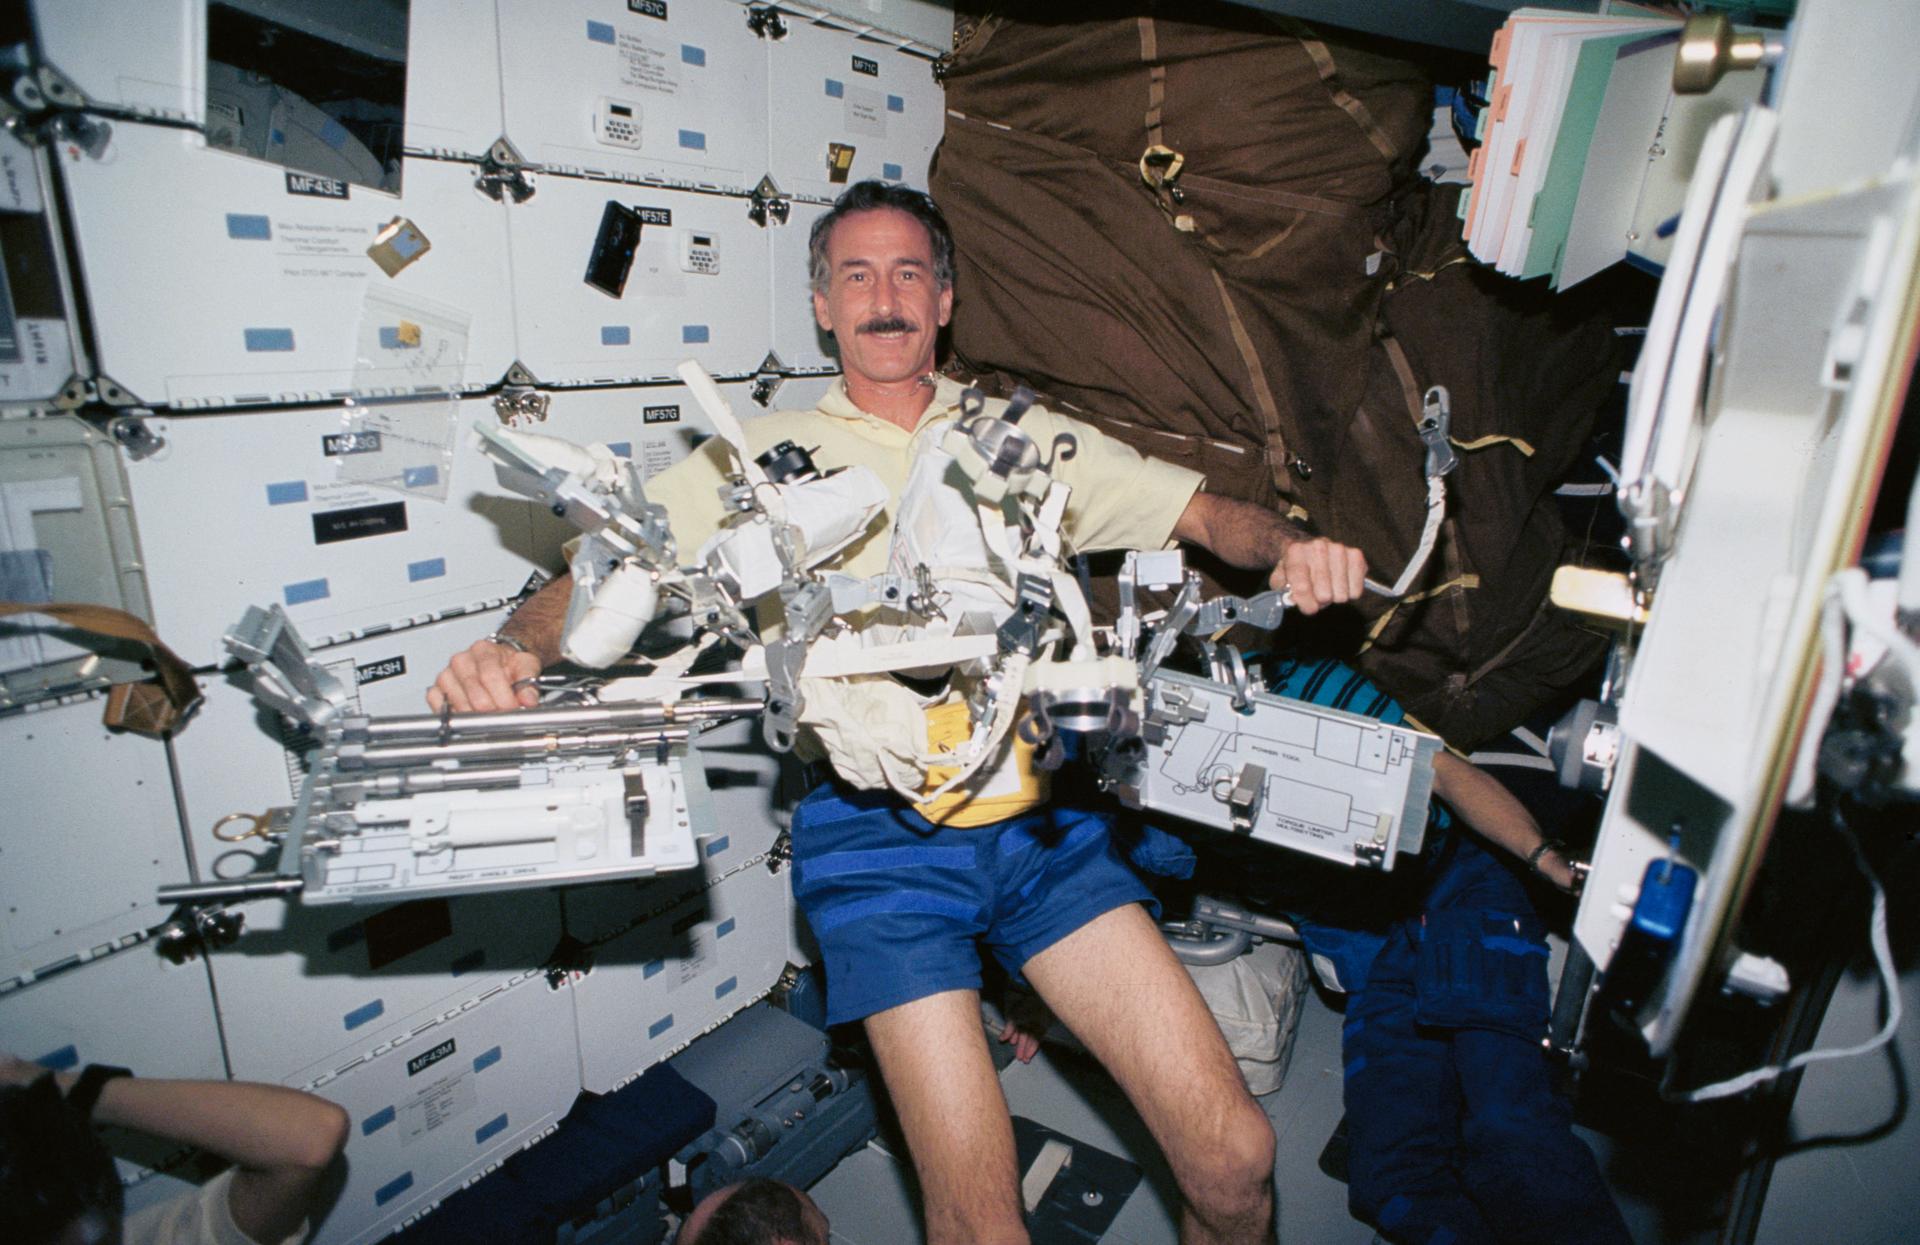 An astronaut floats in the space shuttle crew cabin with numerous tools.